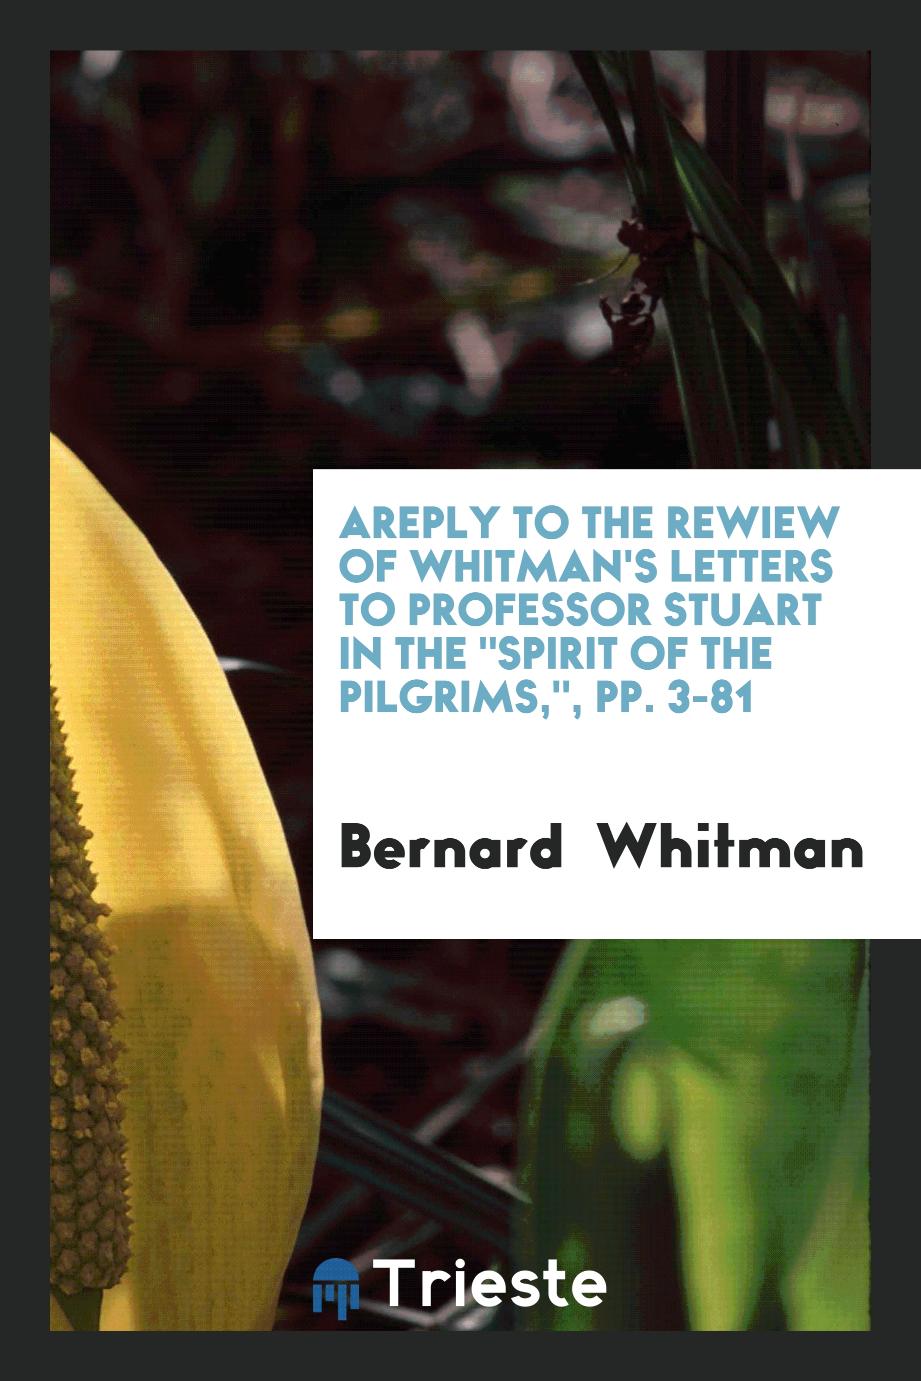 A reply to the rewiew of whitman's Letters to professor Stuart in the "Spirit of the pilgrims,", pp. 3-81